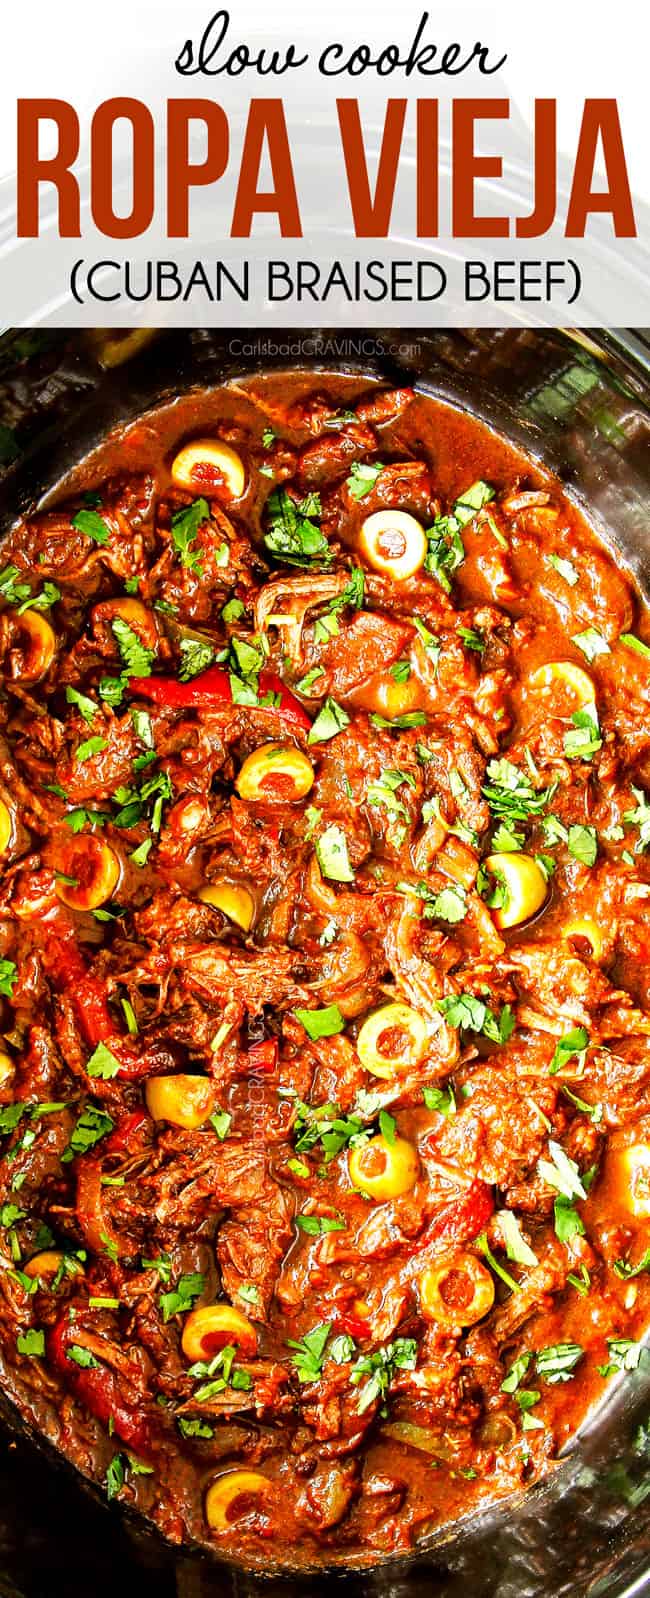 showing how to make Cuban Ropa Vieja by adding Spanish olives to the crockpot